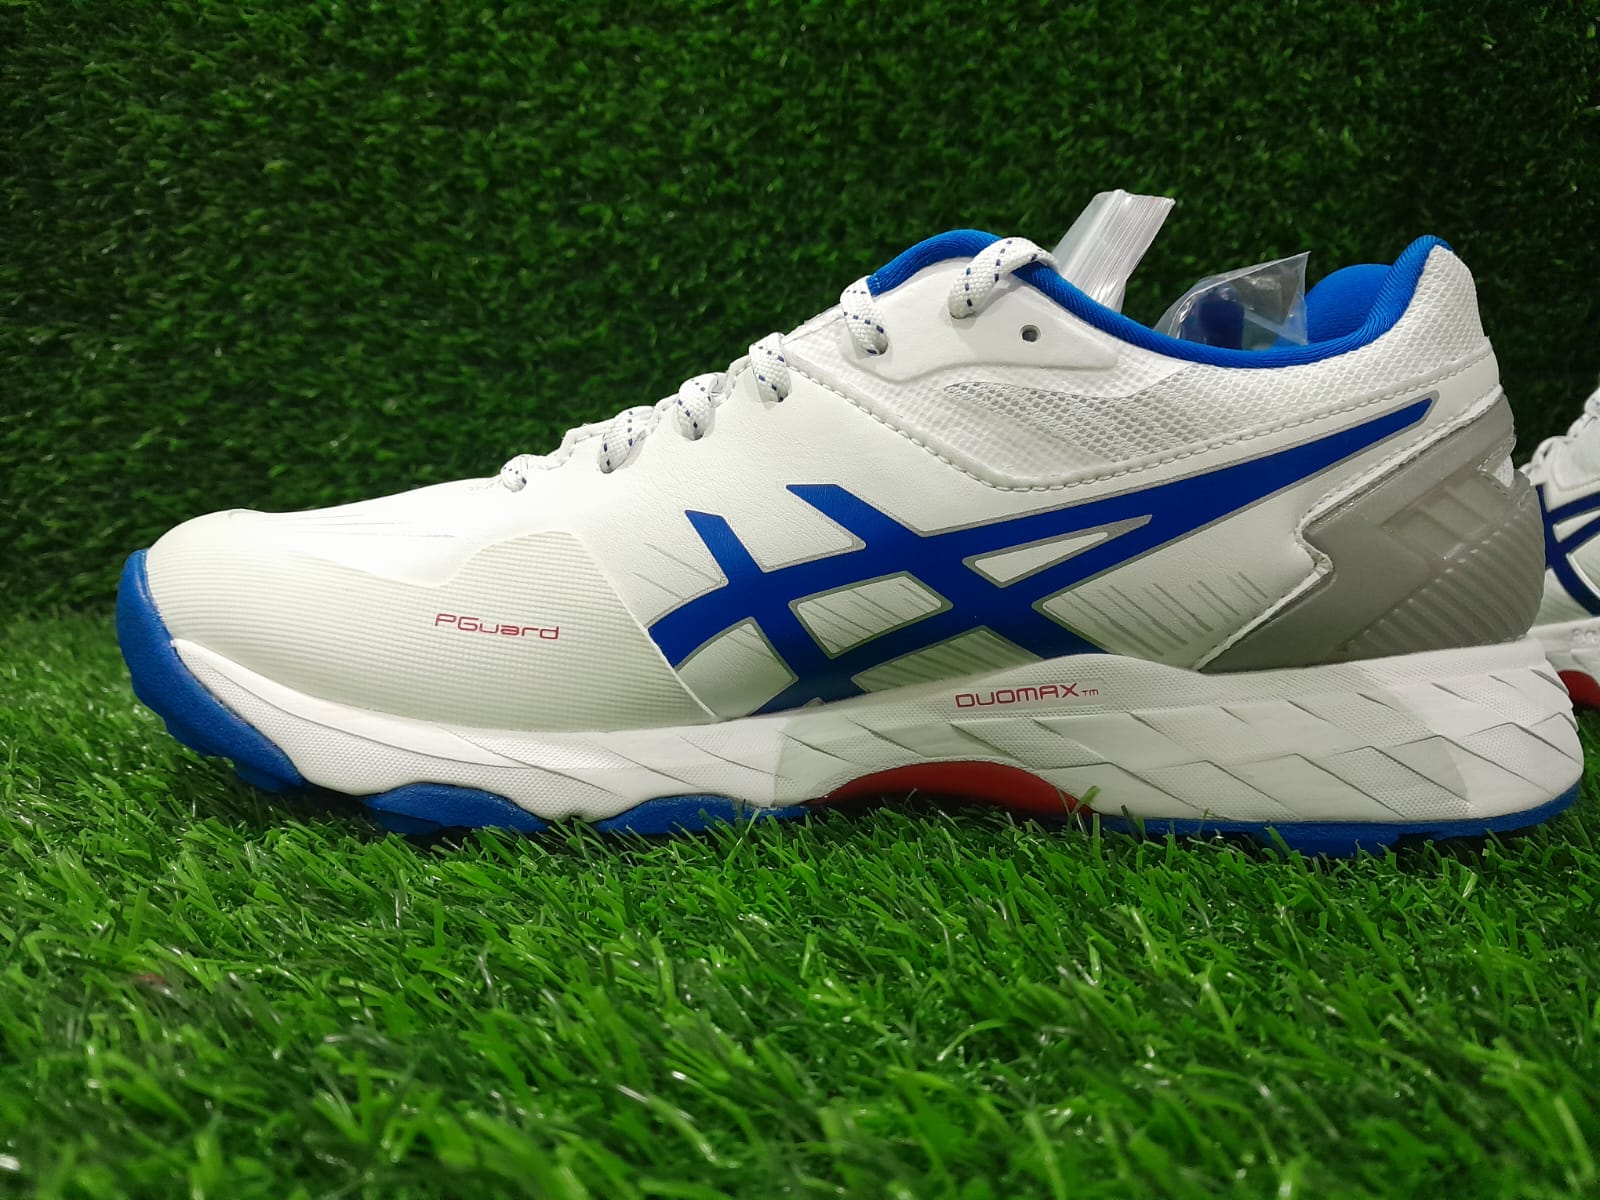 Asics 350 Not Out FF Leather Full Spike Cricket Shoes White Tuna Blue